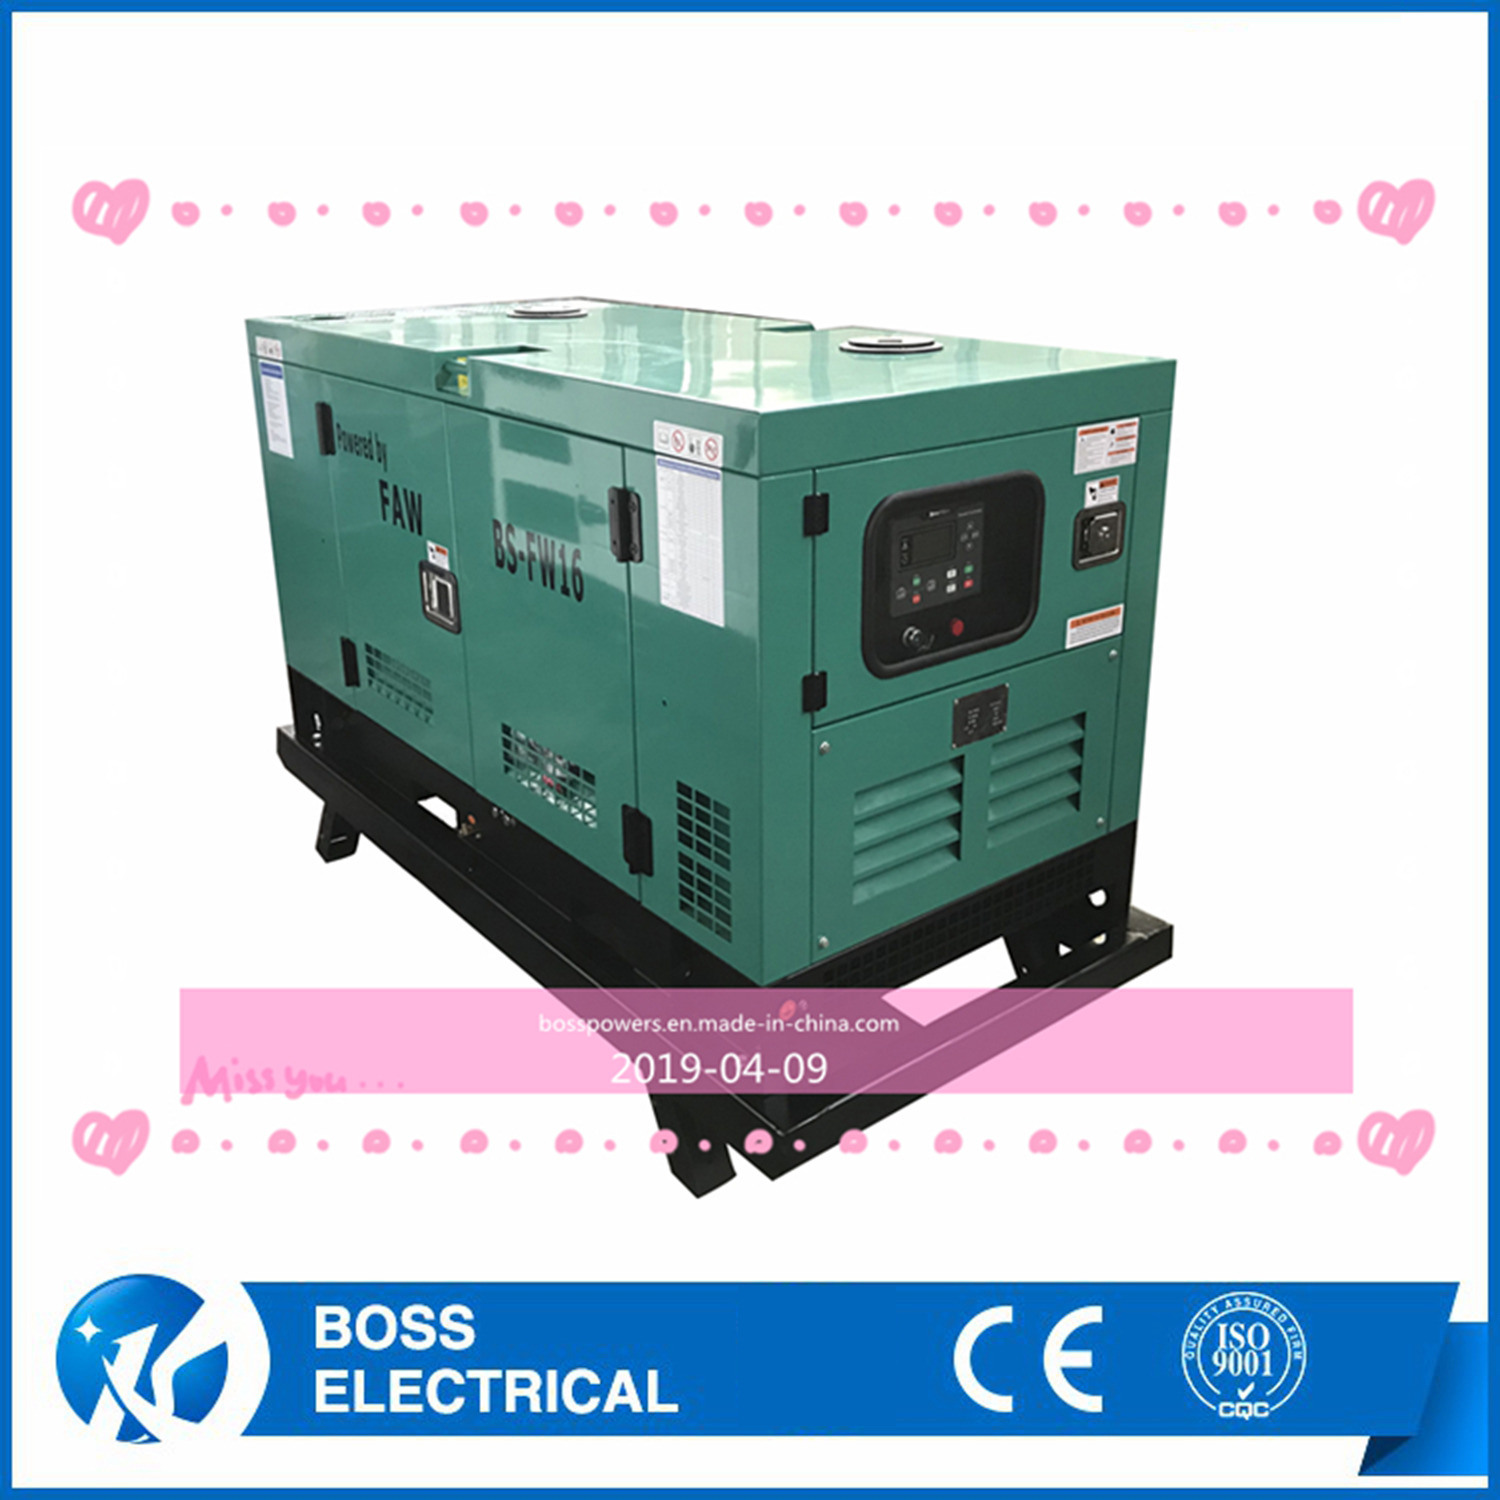 6-2000kw Denyo Silent Diesel Power Electric Generator Mall / Rent / Farm House Africa Hot Sale Powered by a Fawde Engine Set